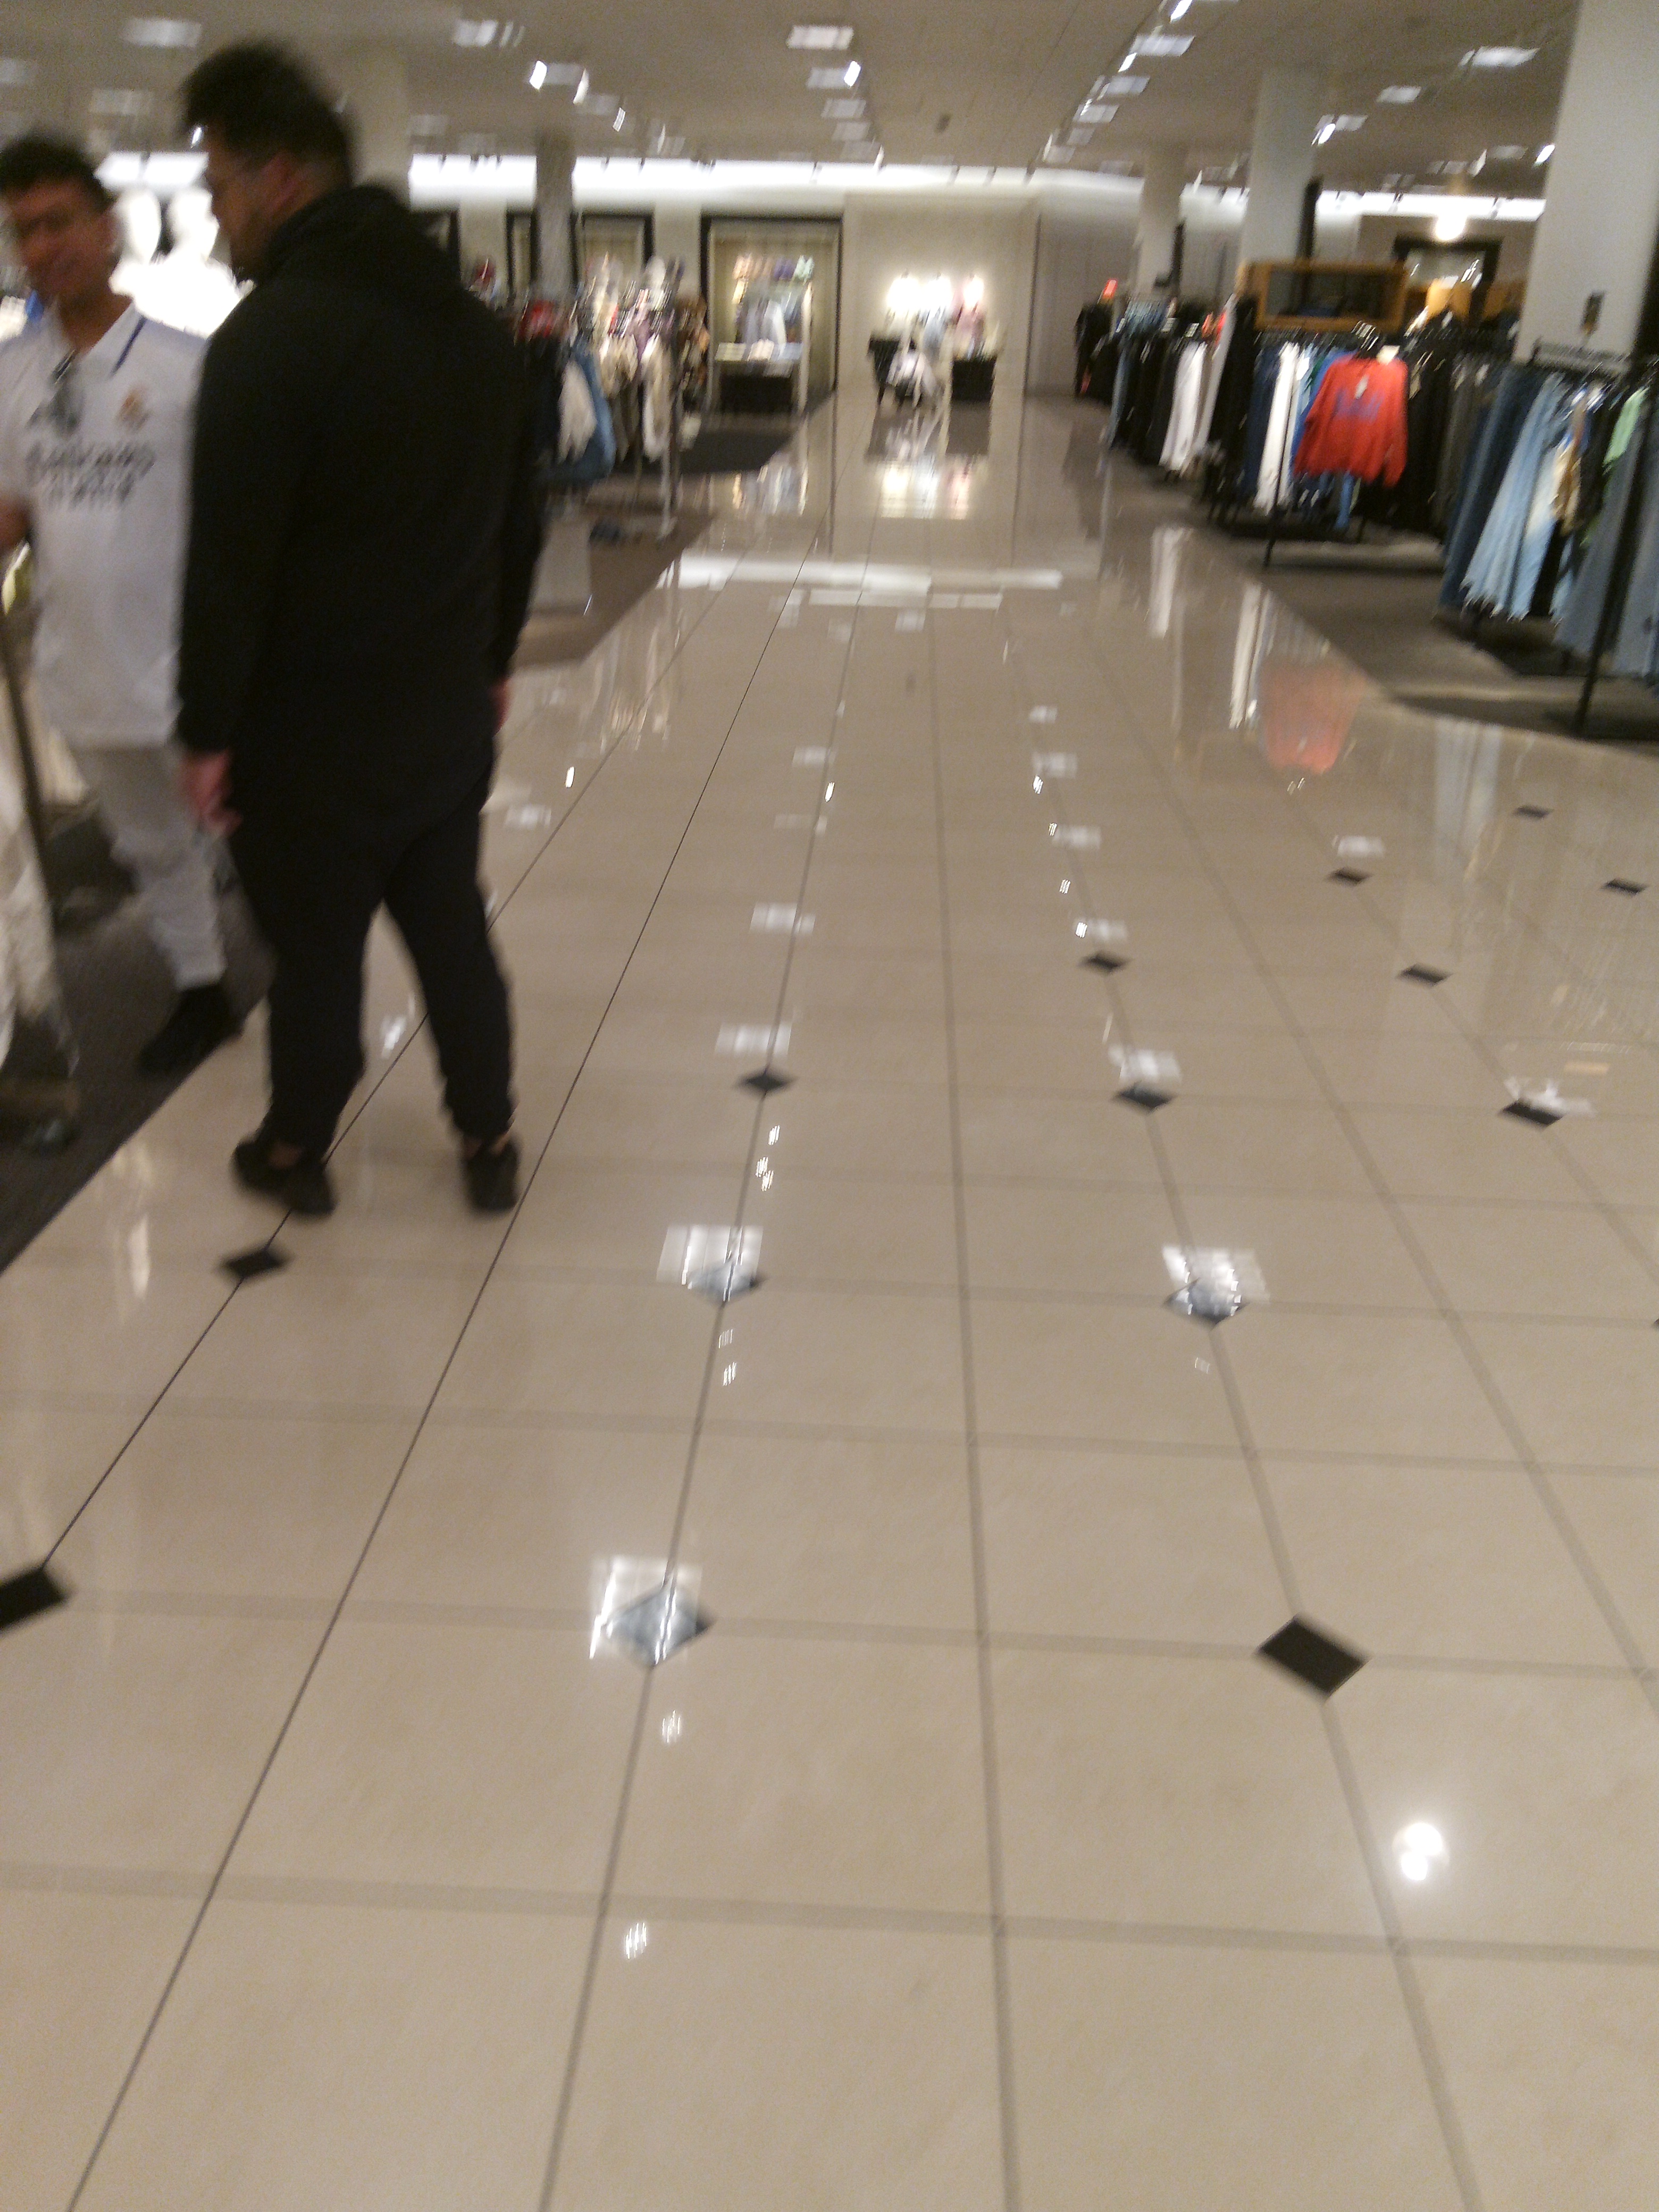 Human traffickers at Nordstrom Fashion Place Mall 